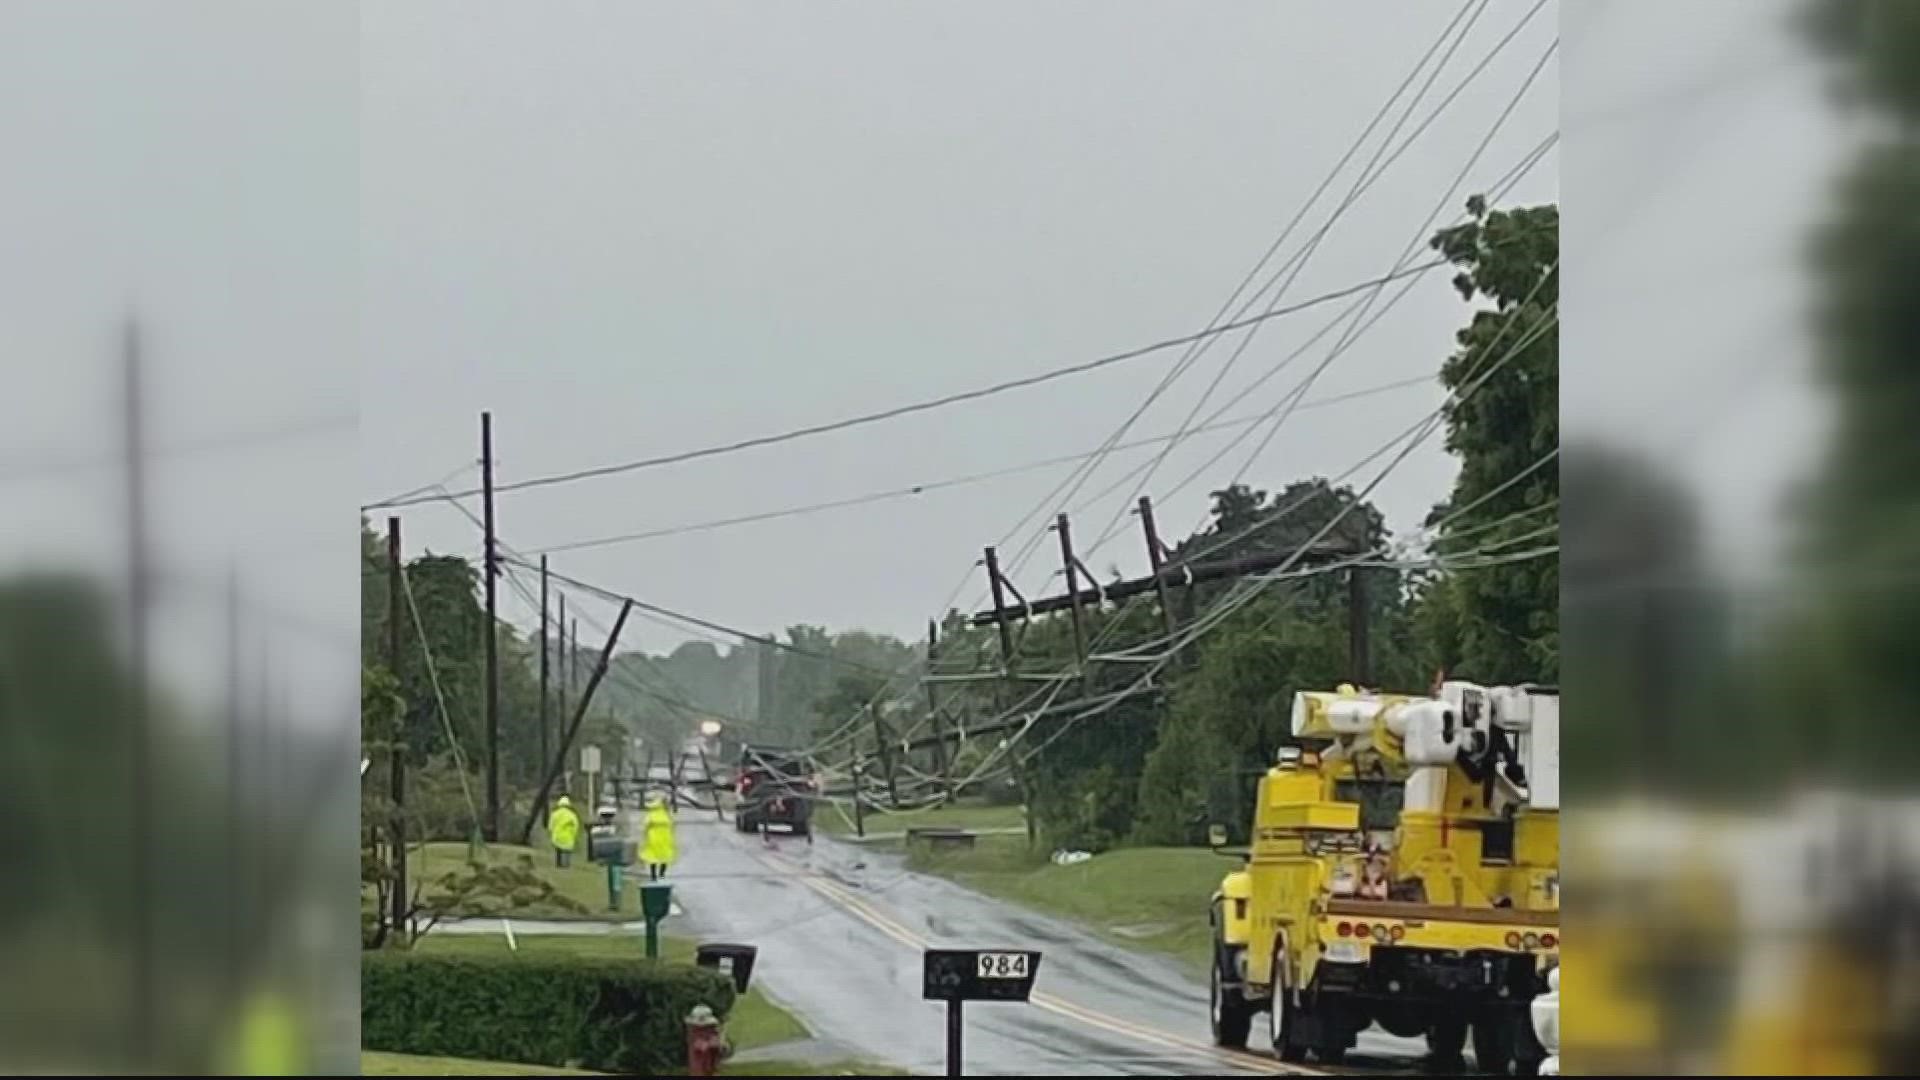 Severe weather damaged more than two dozen power poles in Winchester, Virginia, Tuesday night. but an "all-hands approach" has gotten all outages restored Wednesday